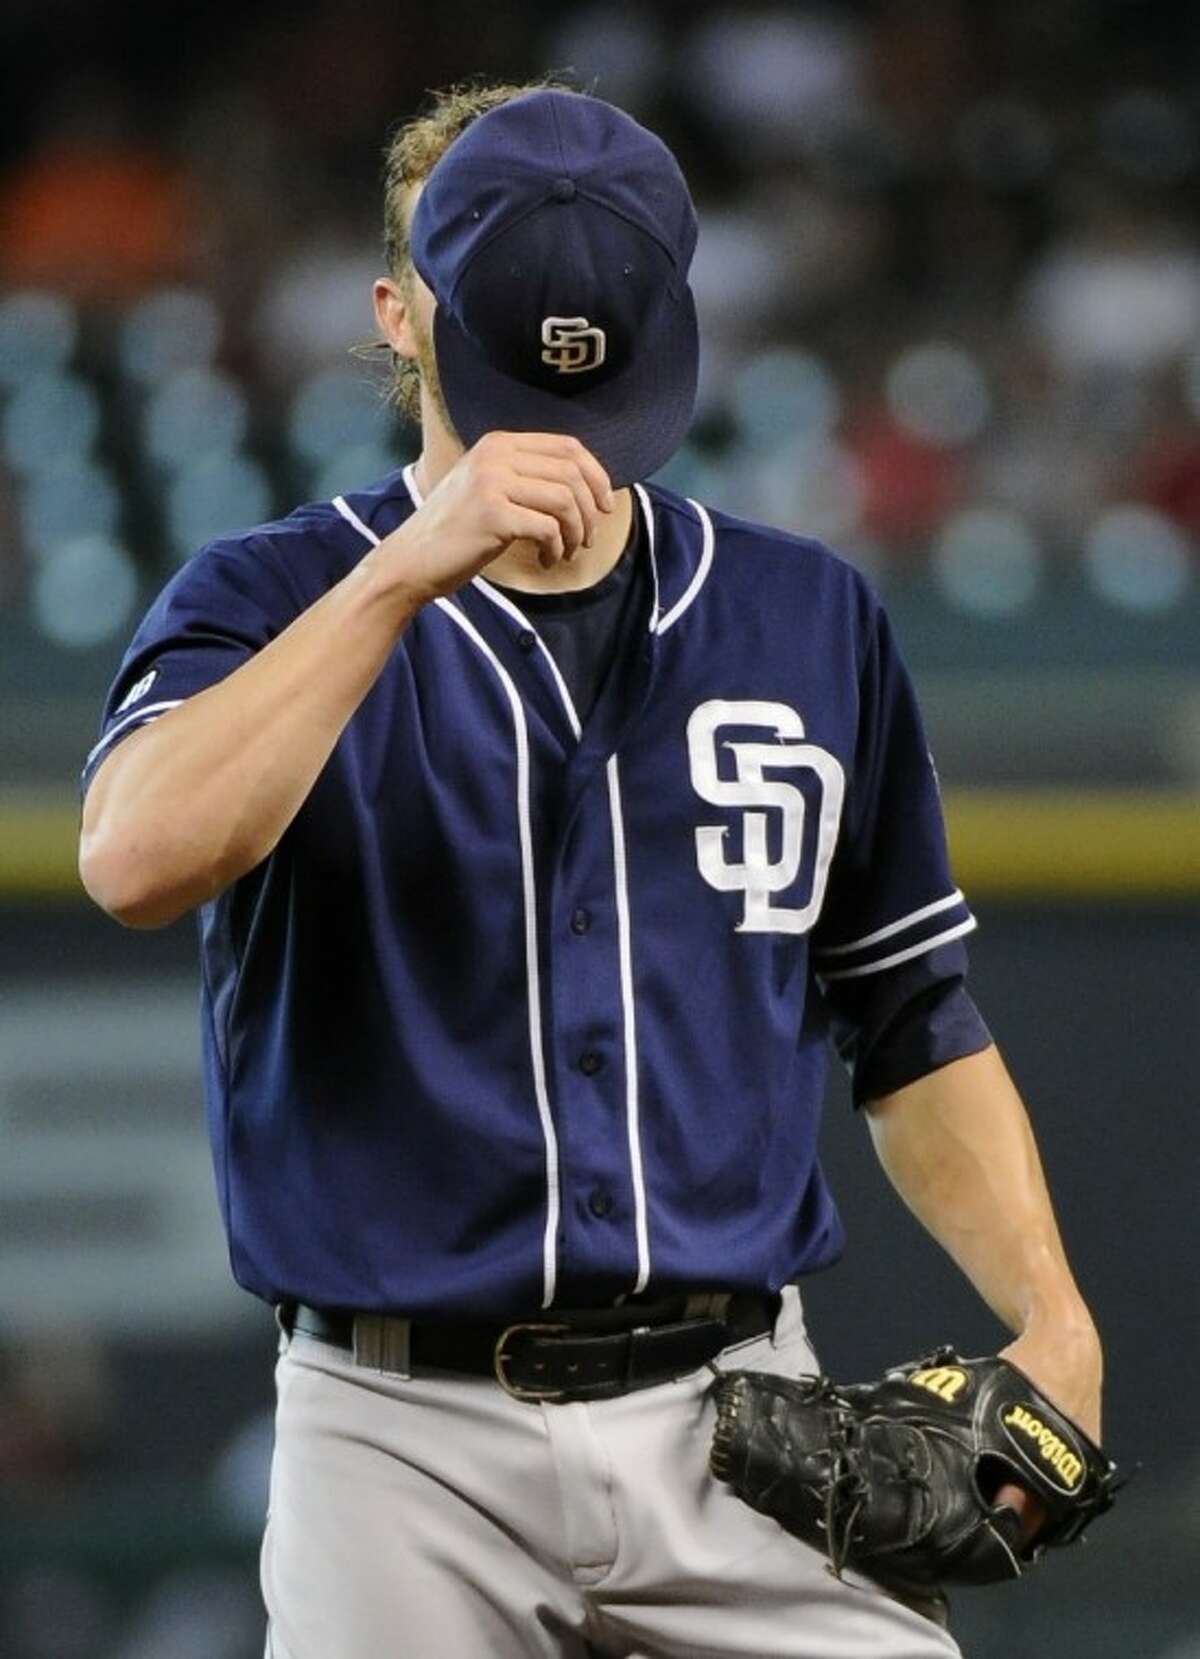 San Diego Padres pitcher Andrew Cashner, a Conroe High School graduate, pauses before throwing the first pitch of the bottom of the second inning against the Houston Astros on Thursday in Houston.